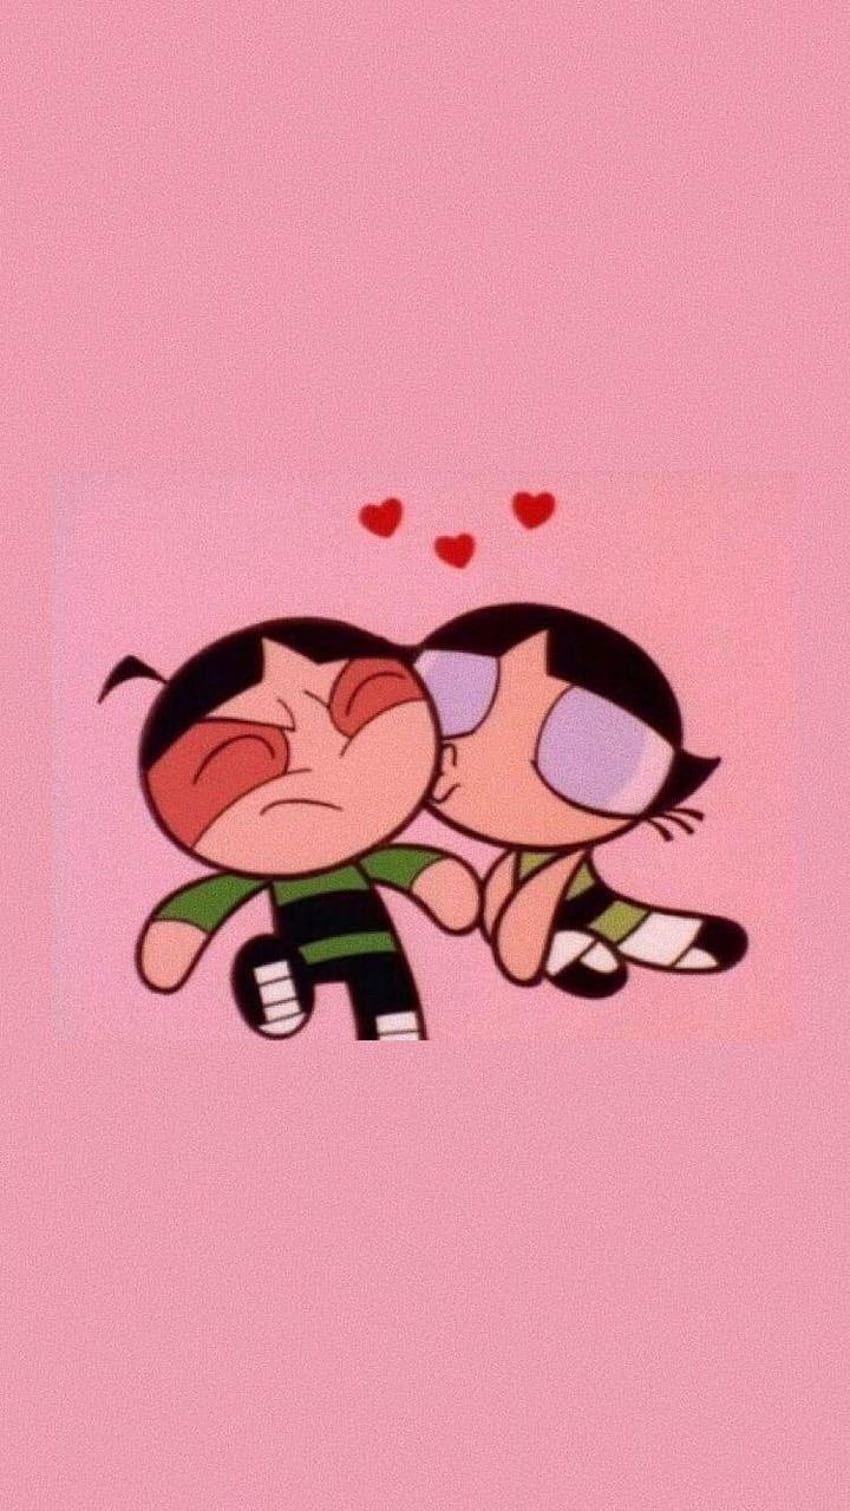 Cute cartoon characters, two characters from the powerpuff girls, pink background, phone wallpaper - Buttercup